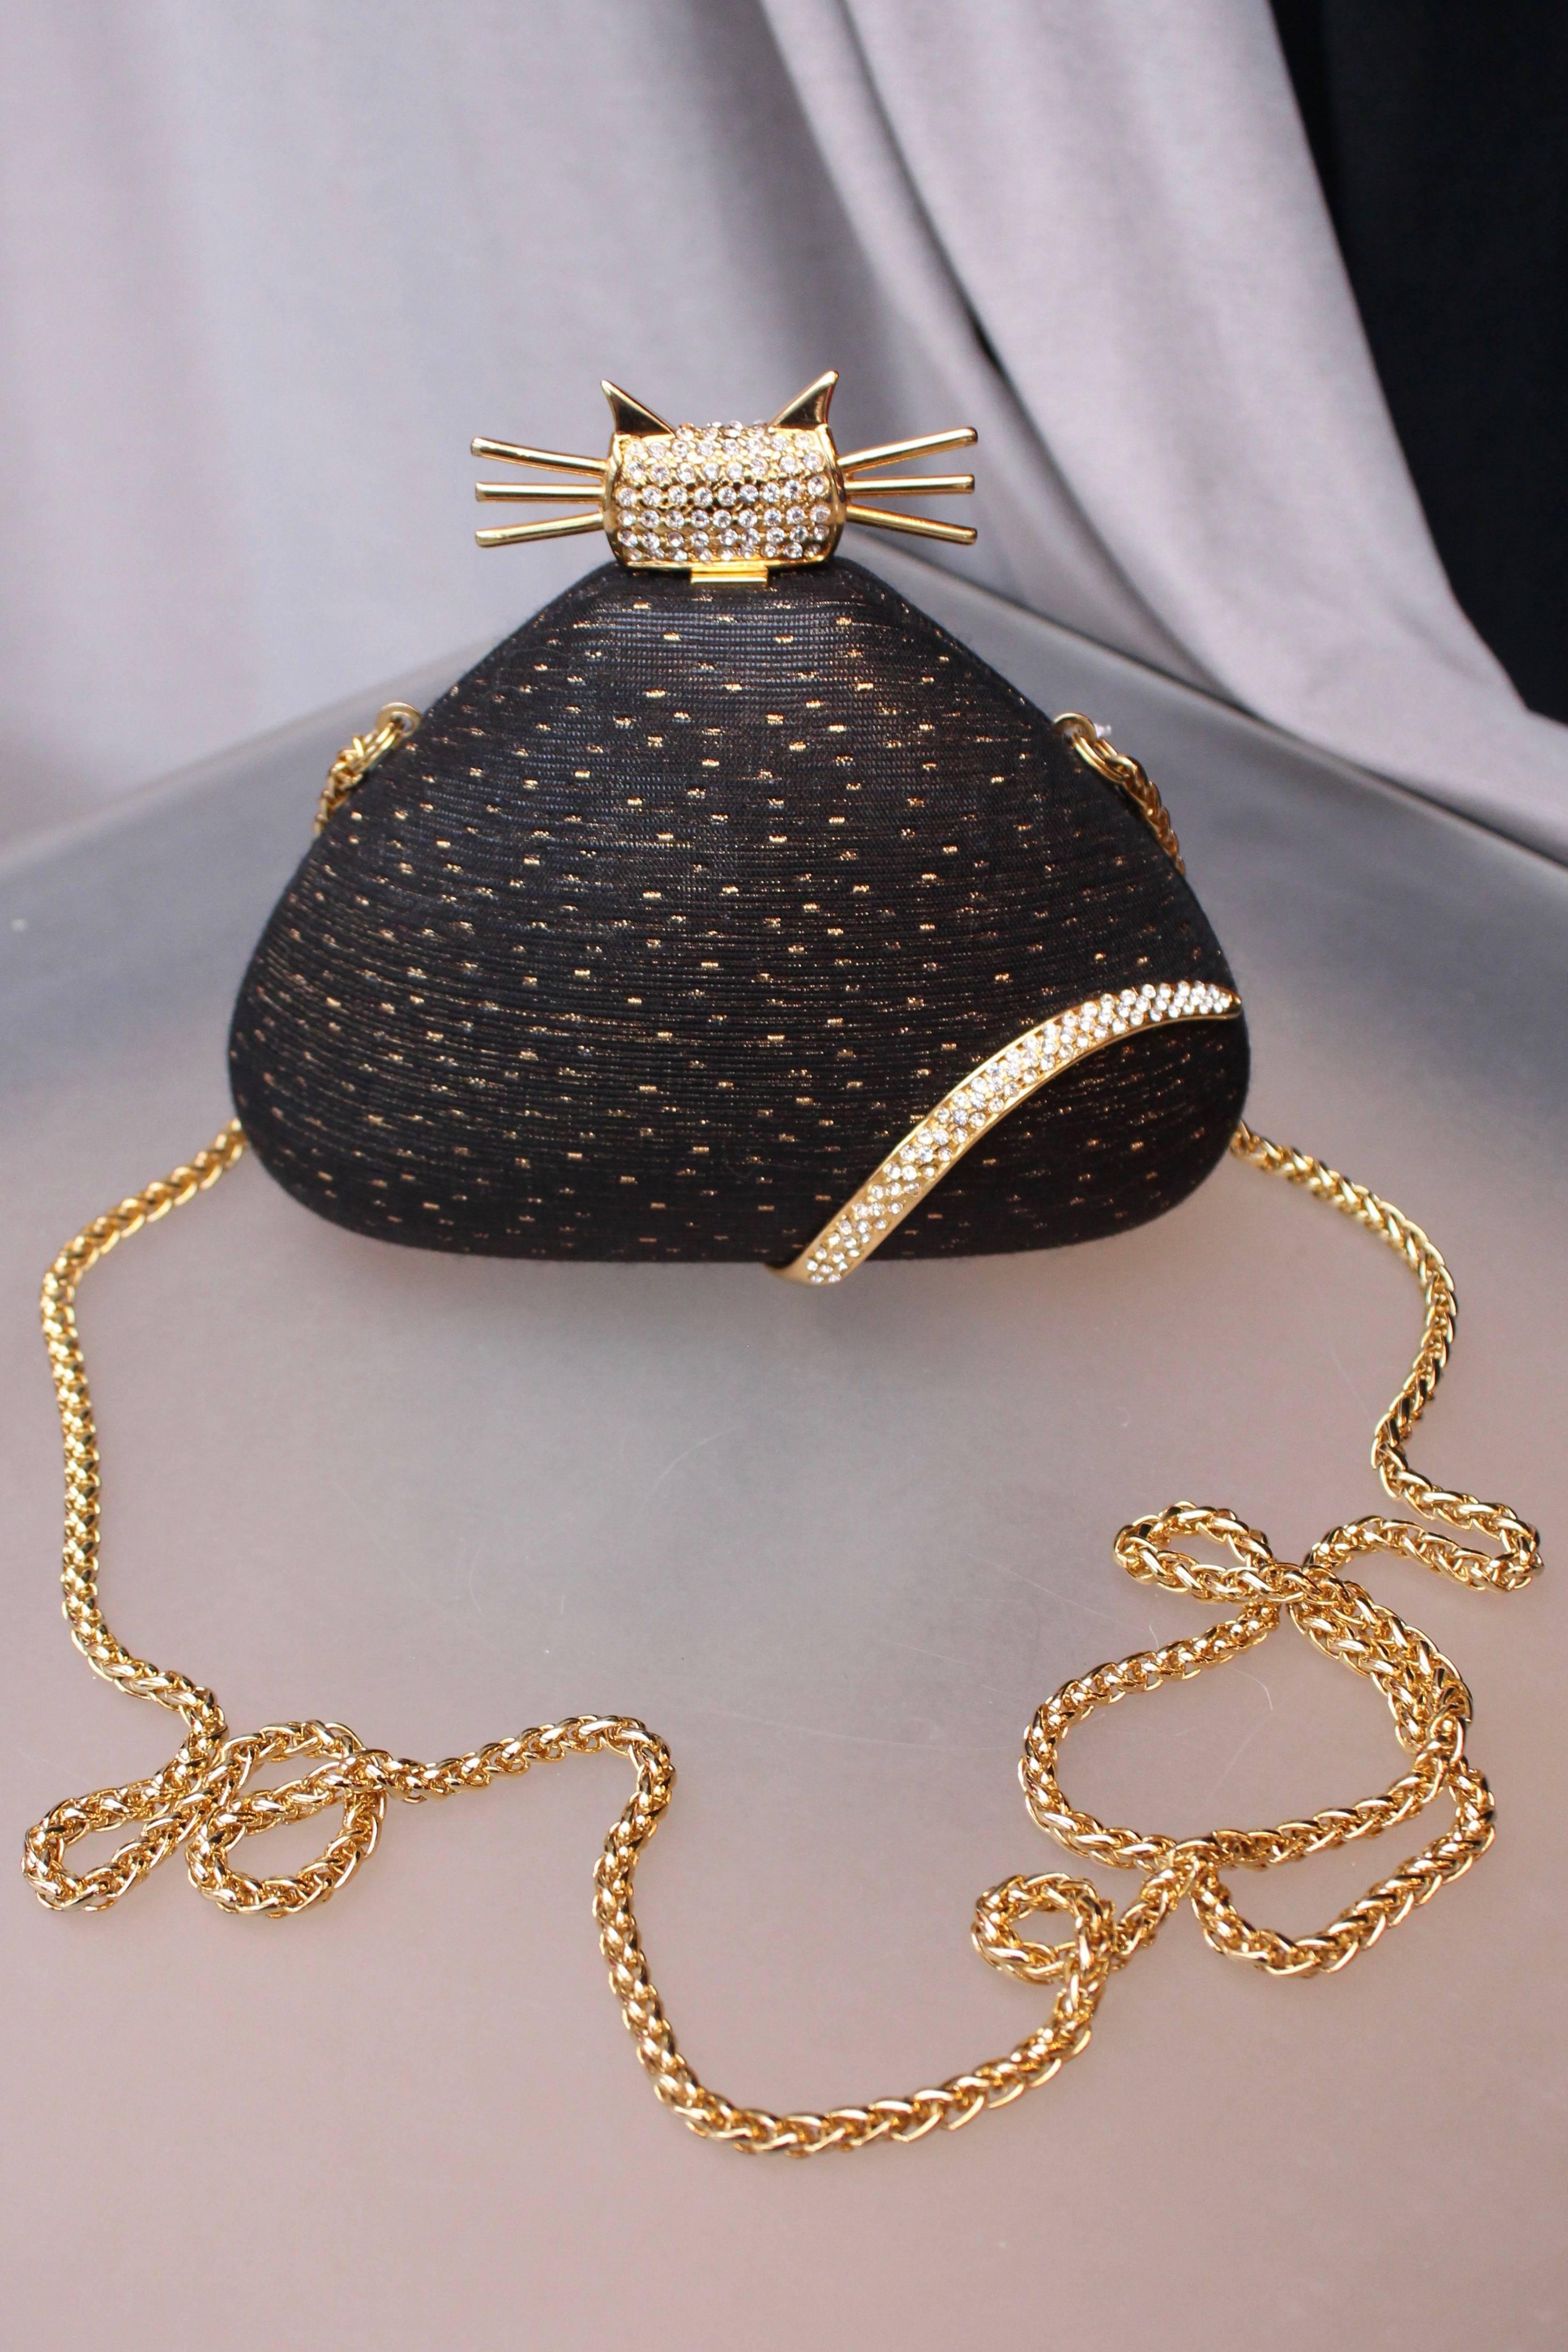 RODO (Made in Italy) Lovely evening triangular”minaudière” composed of black fabric with golden lamé speckle, representing a cat. The tail and the head of the cat are represented by gilded metal elements paved with rhinestones. Black monogrammed